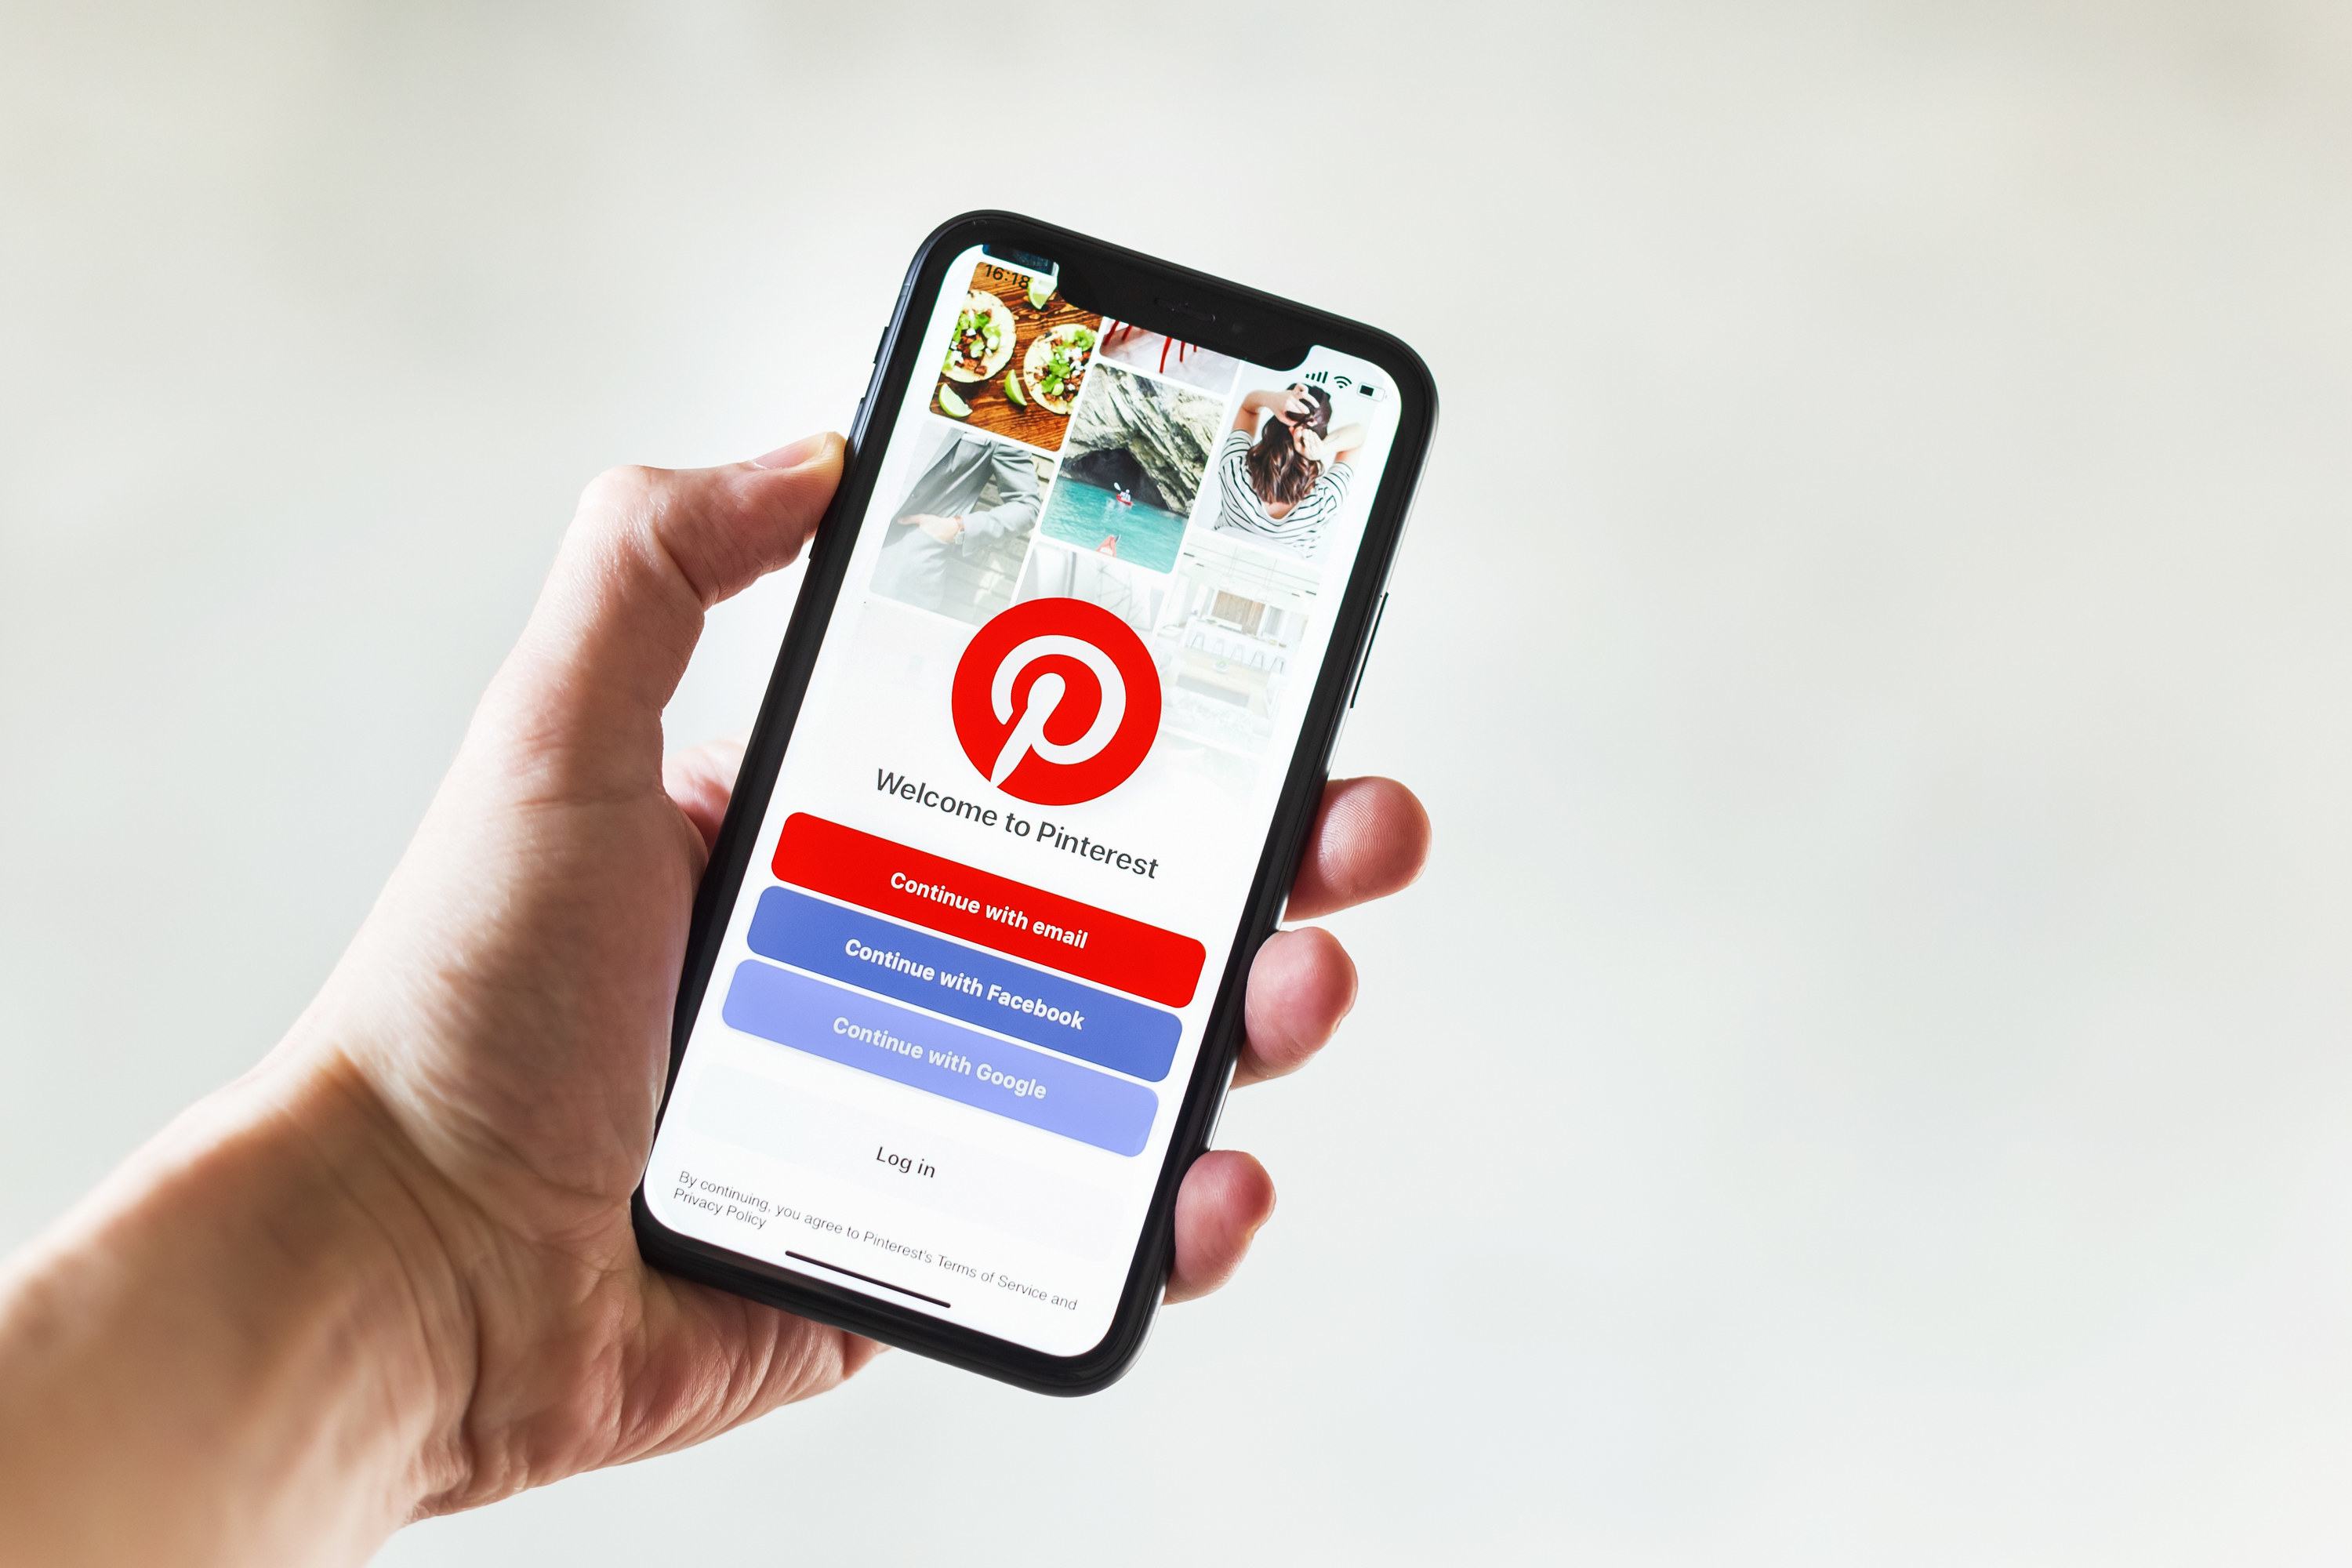 The Pinterest mobile log-in page on a smartphone